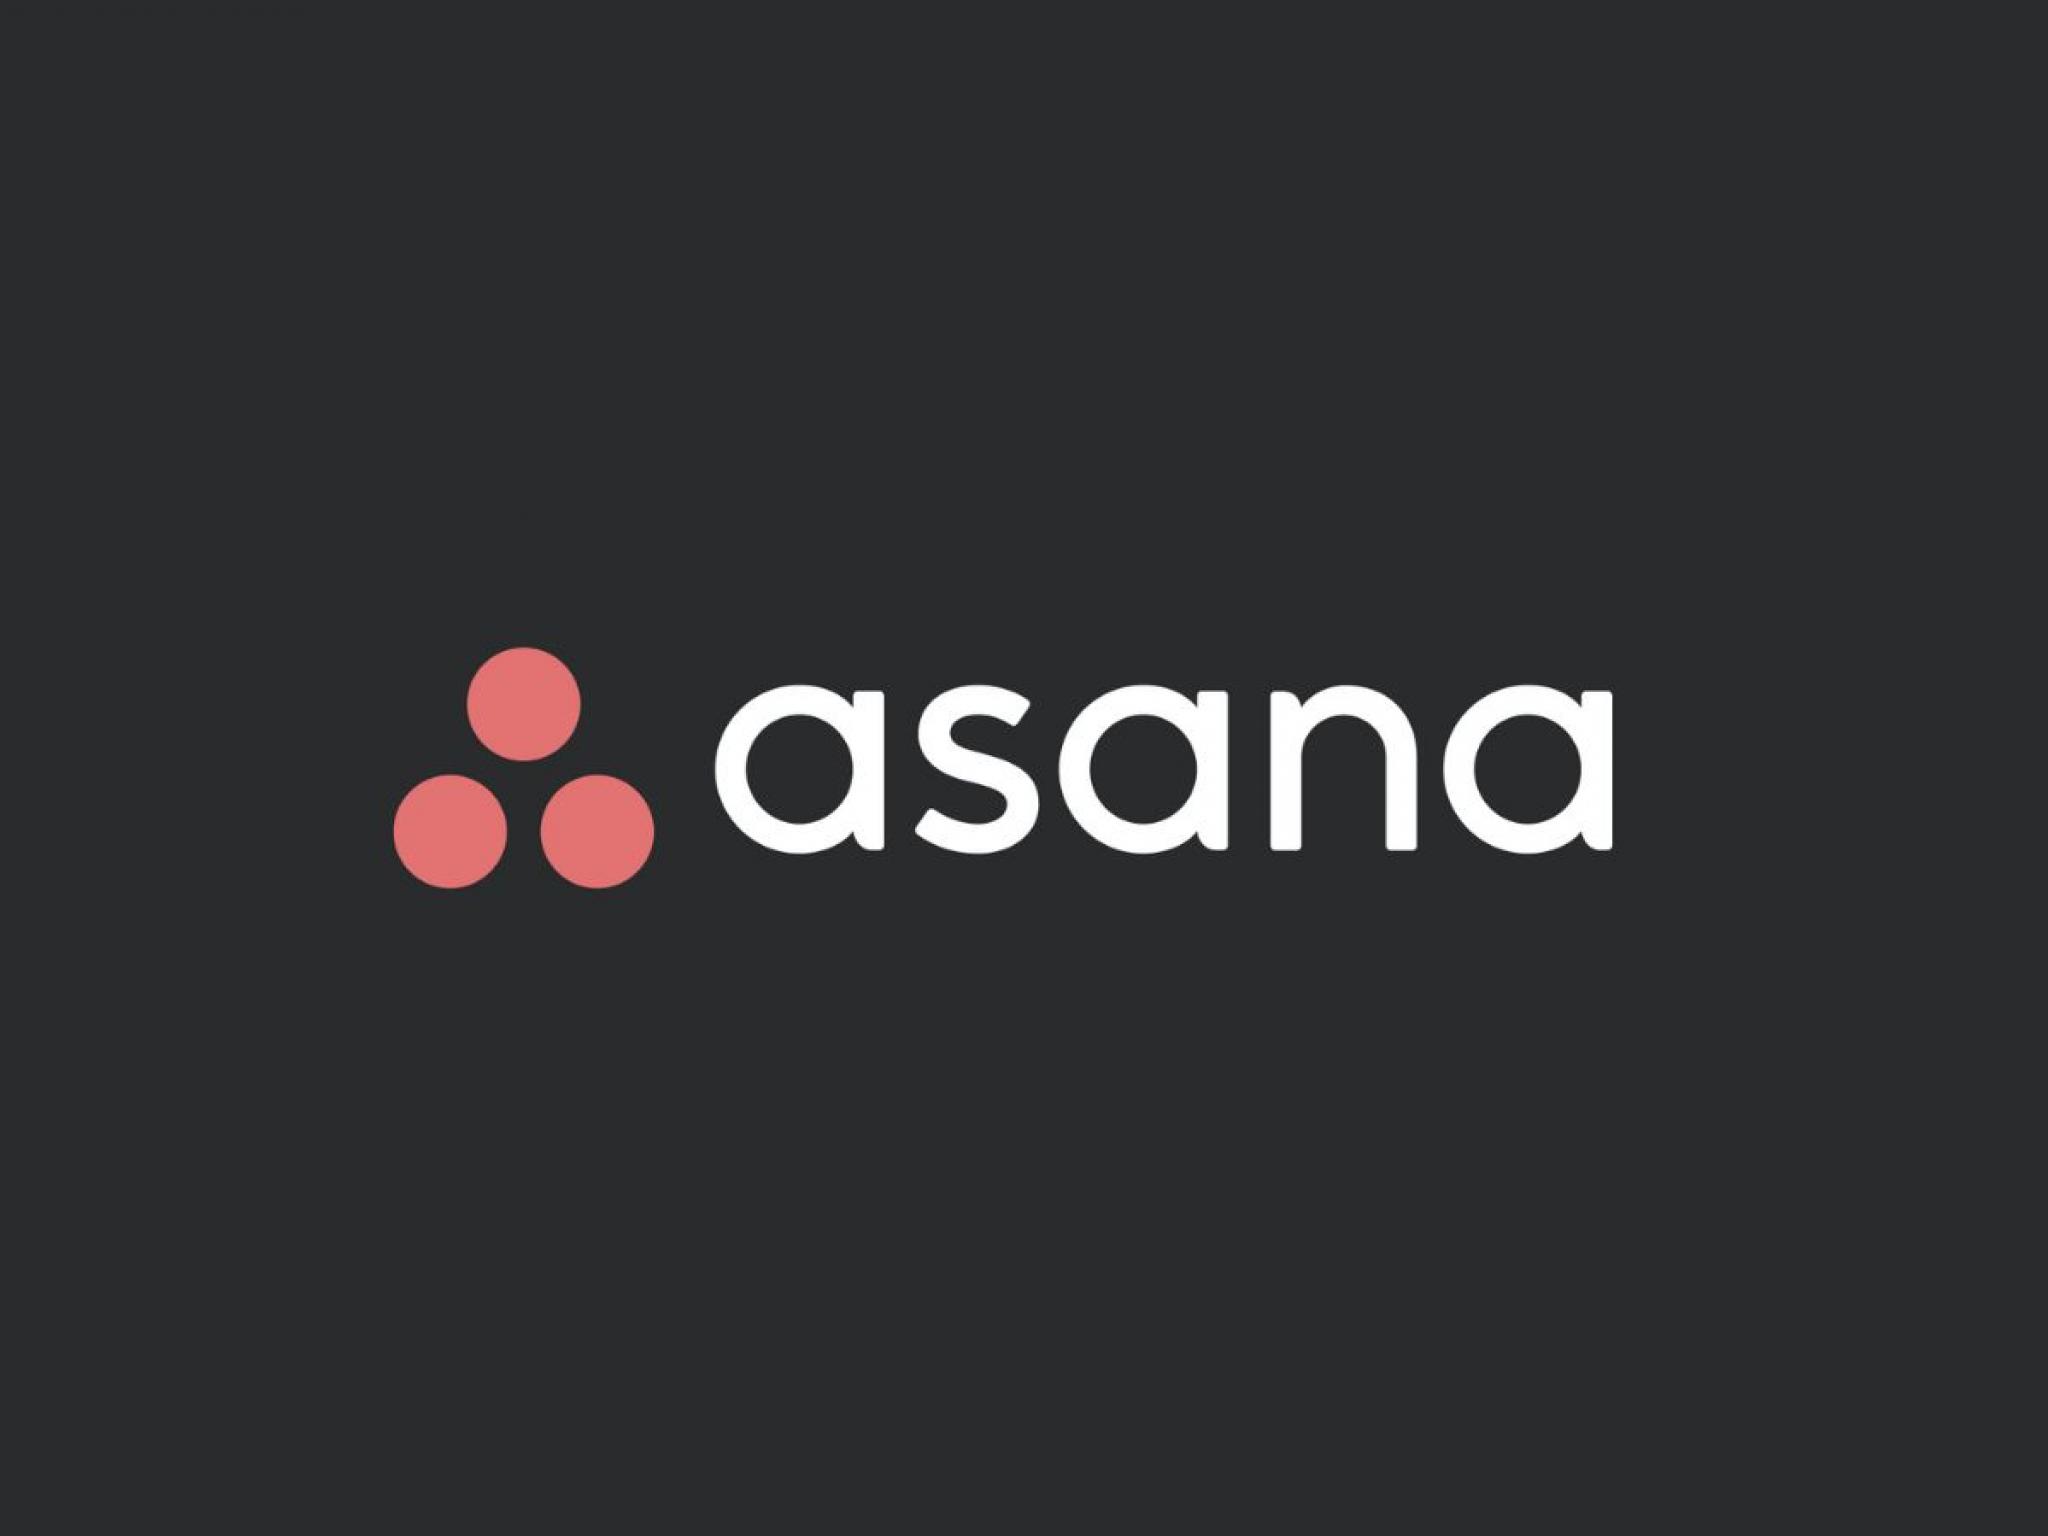  asana-enbridge-and-other-big-stocks-moving-lower-in-wednesdays-pre-market-session 